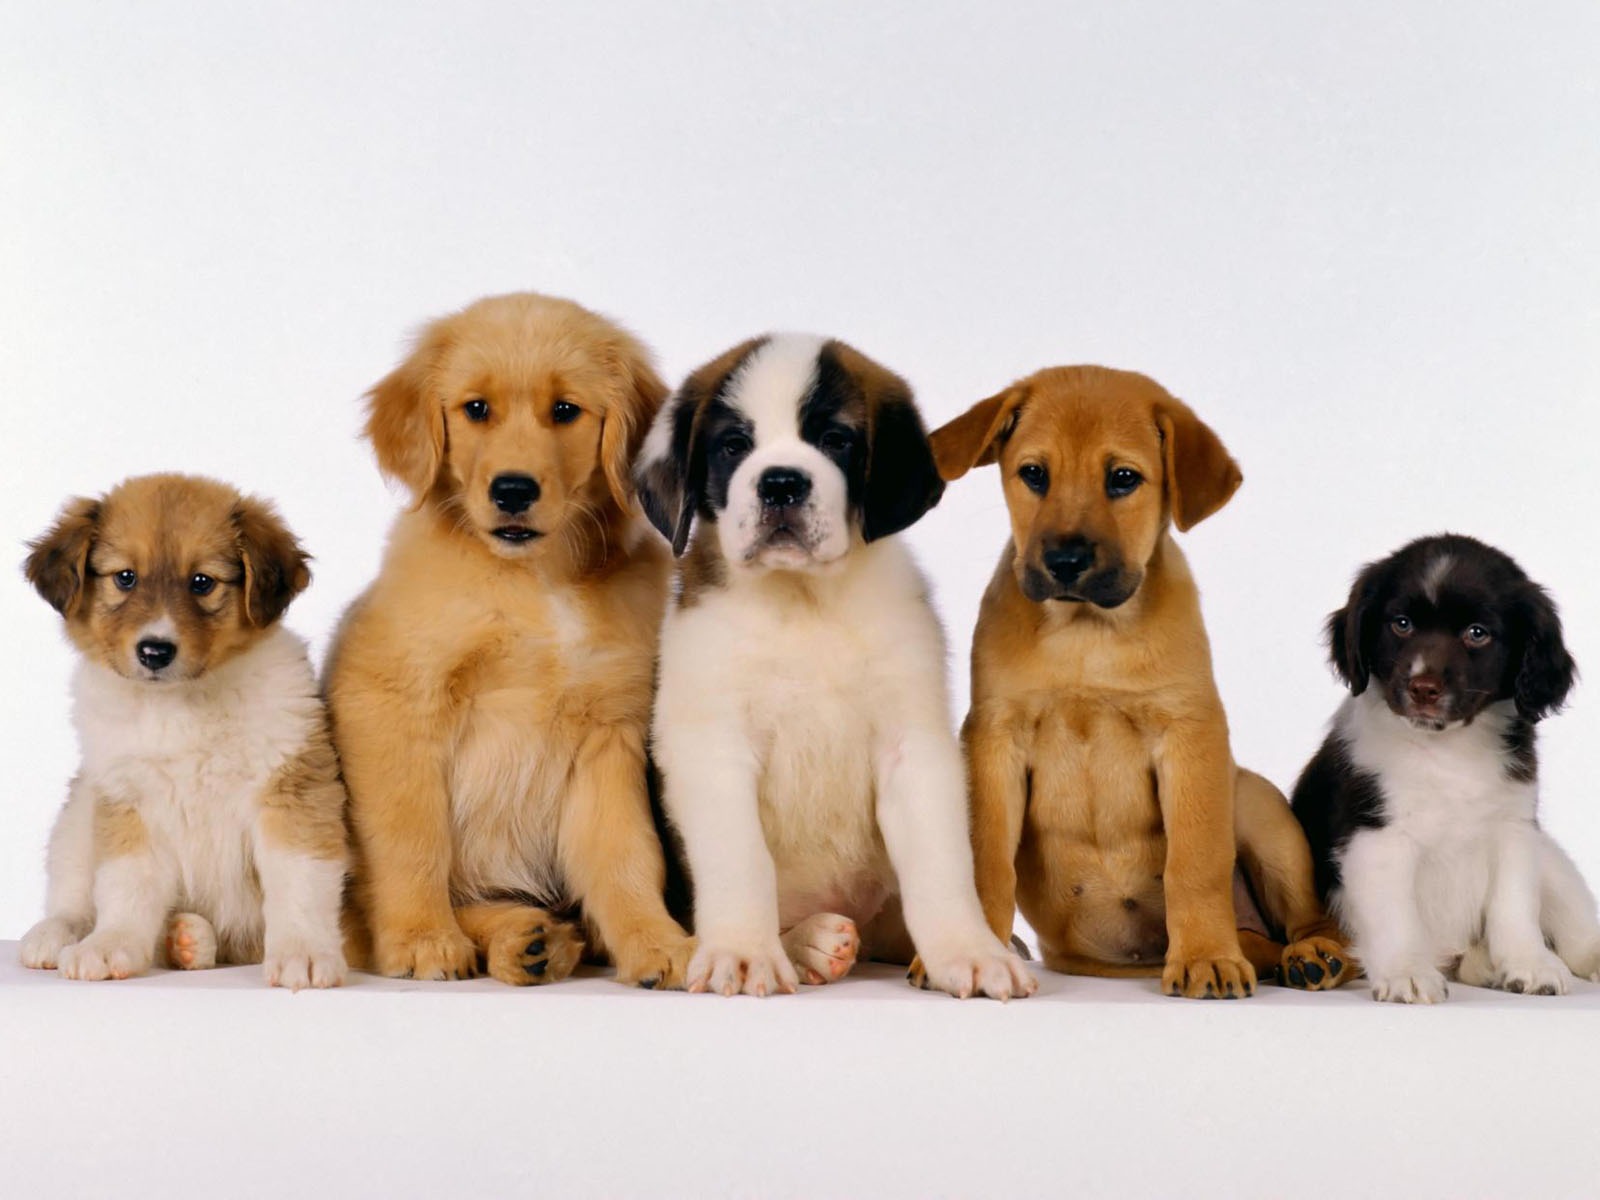 Puppy Photo HD wallpapers (1) #1 - 1600x1200